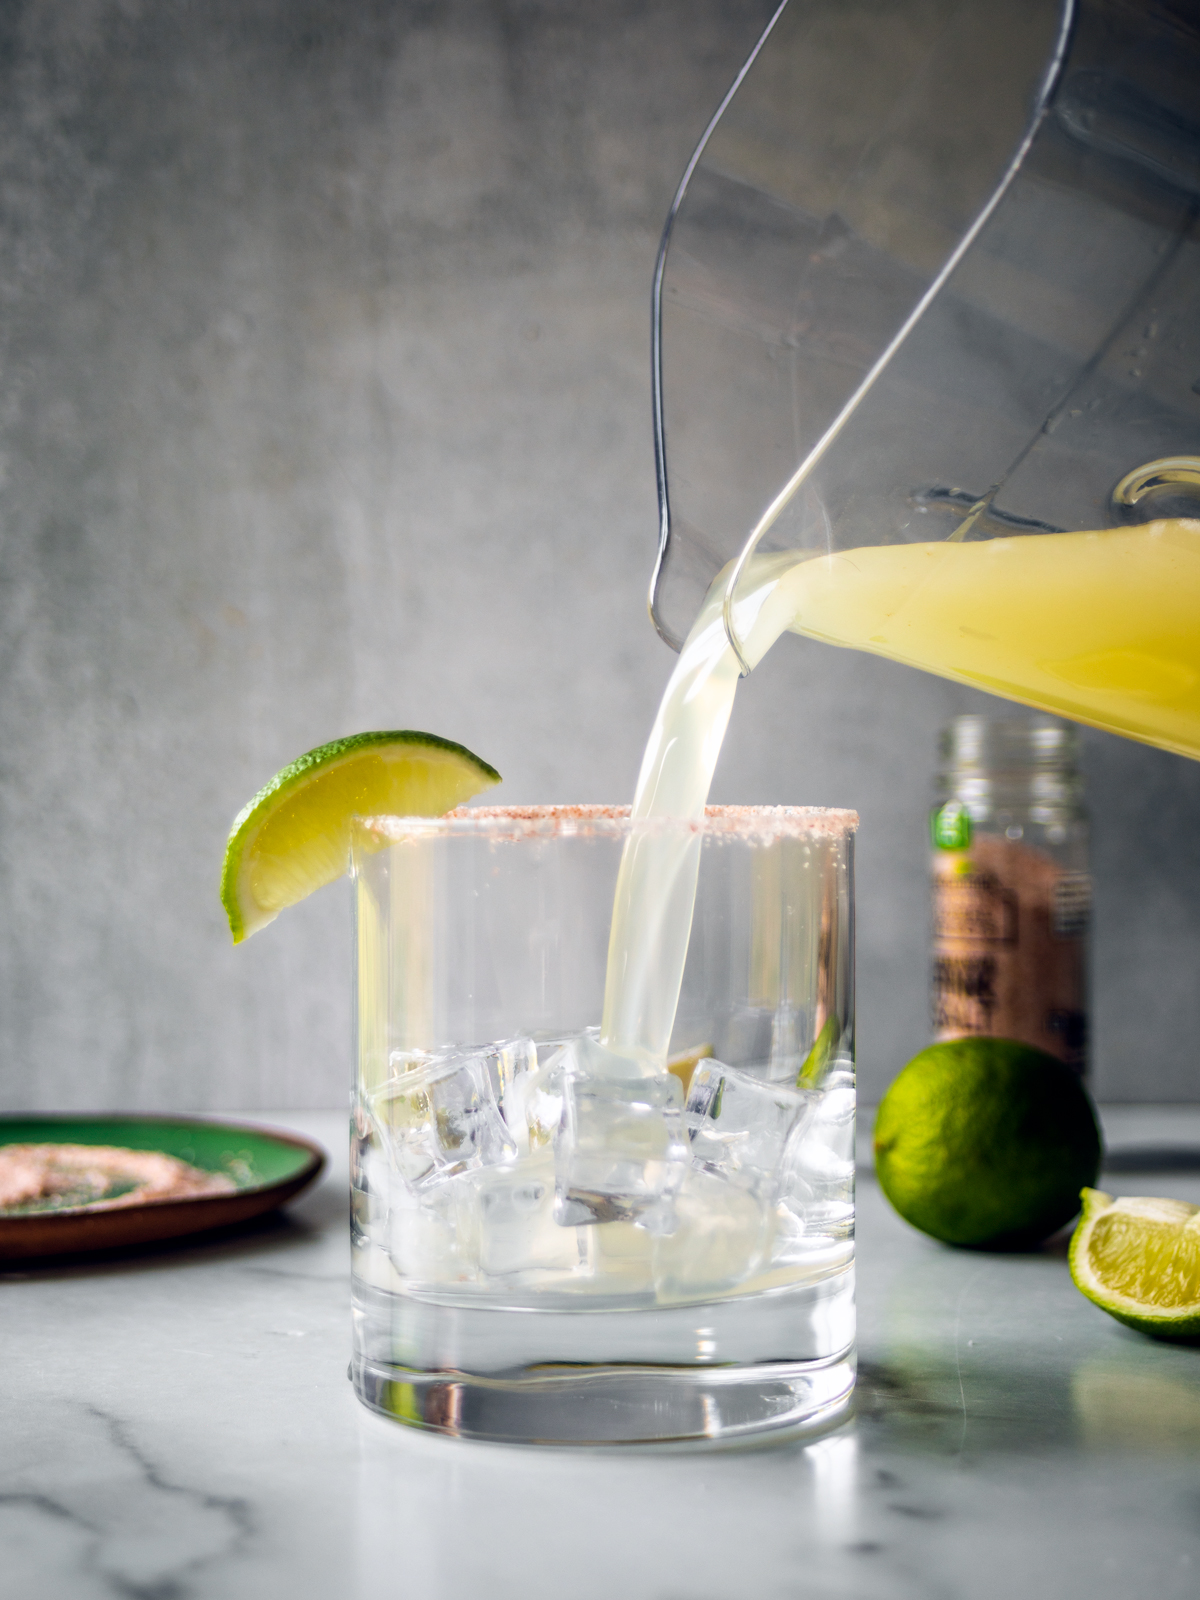 Salt-rimmed glass of ice with margarita being poured into it.